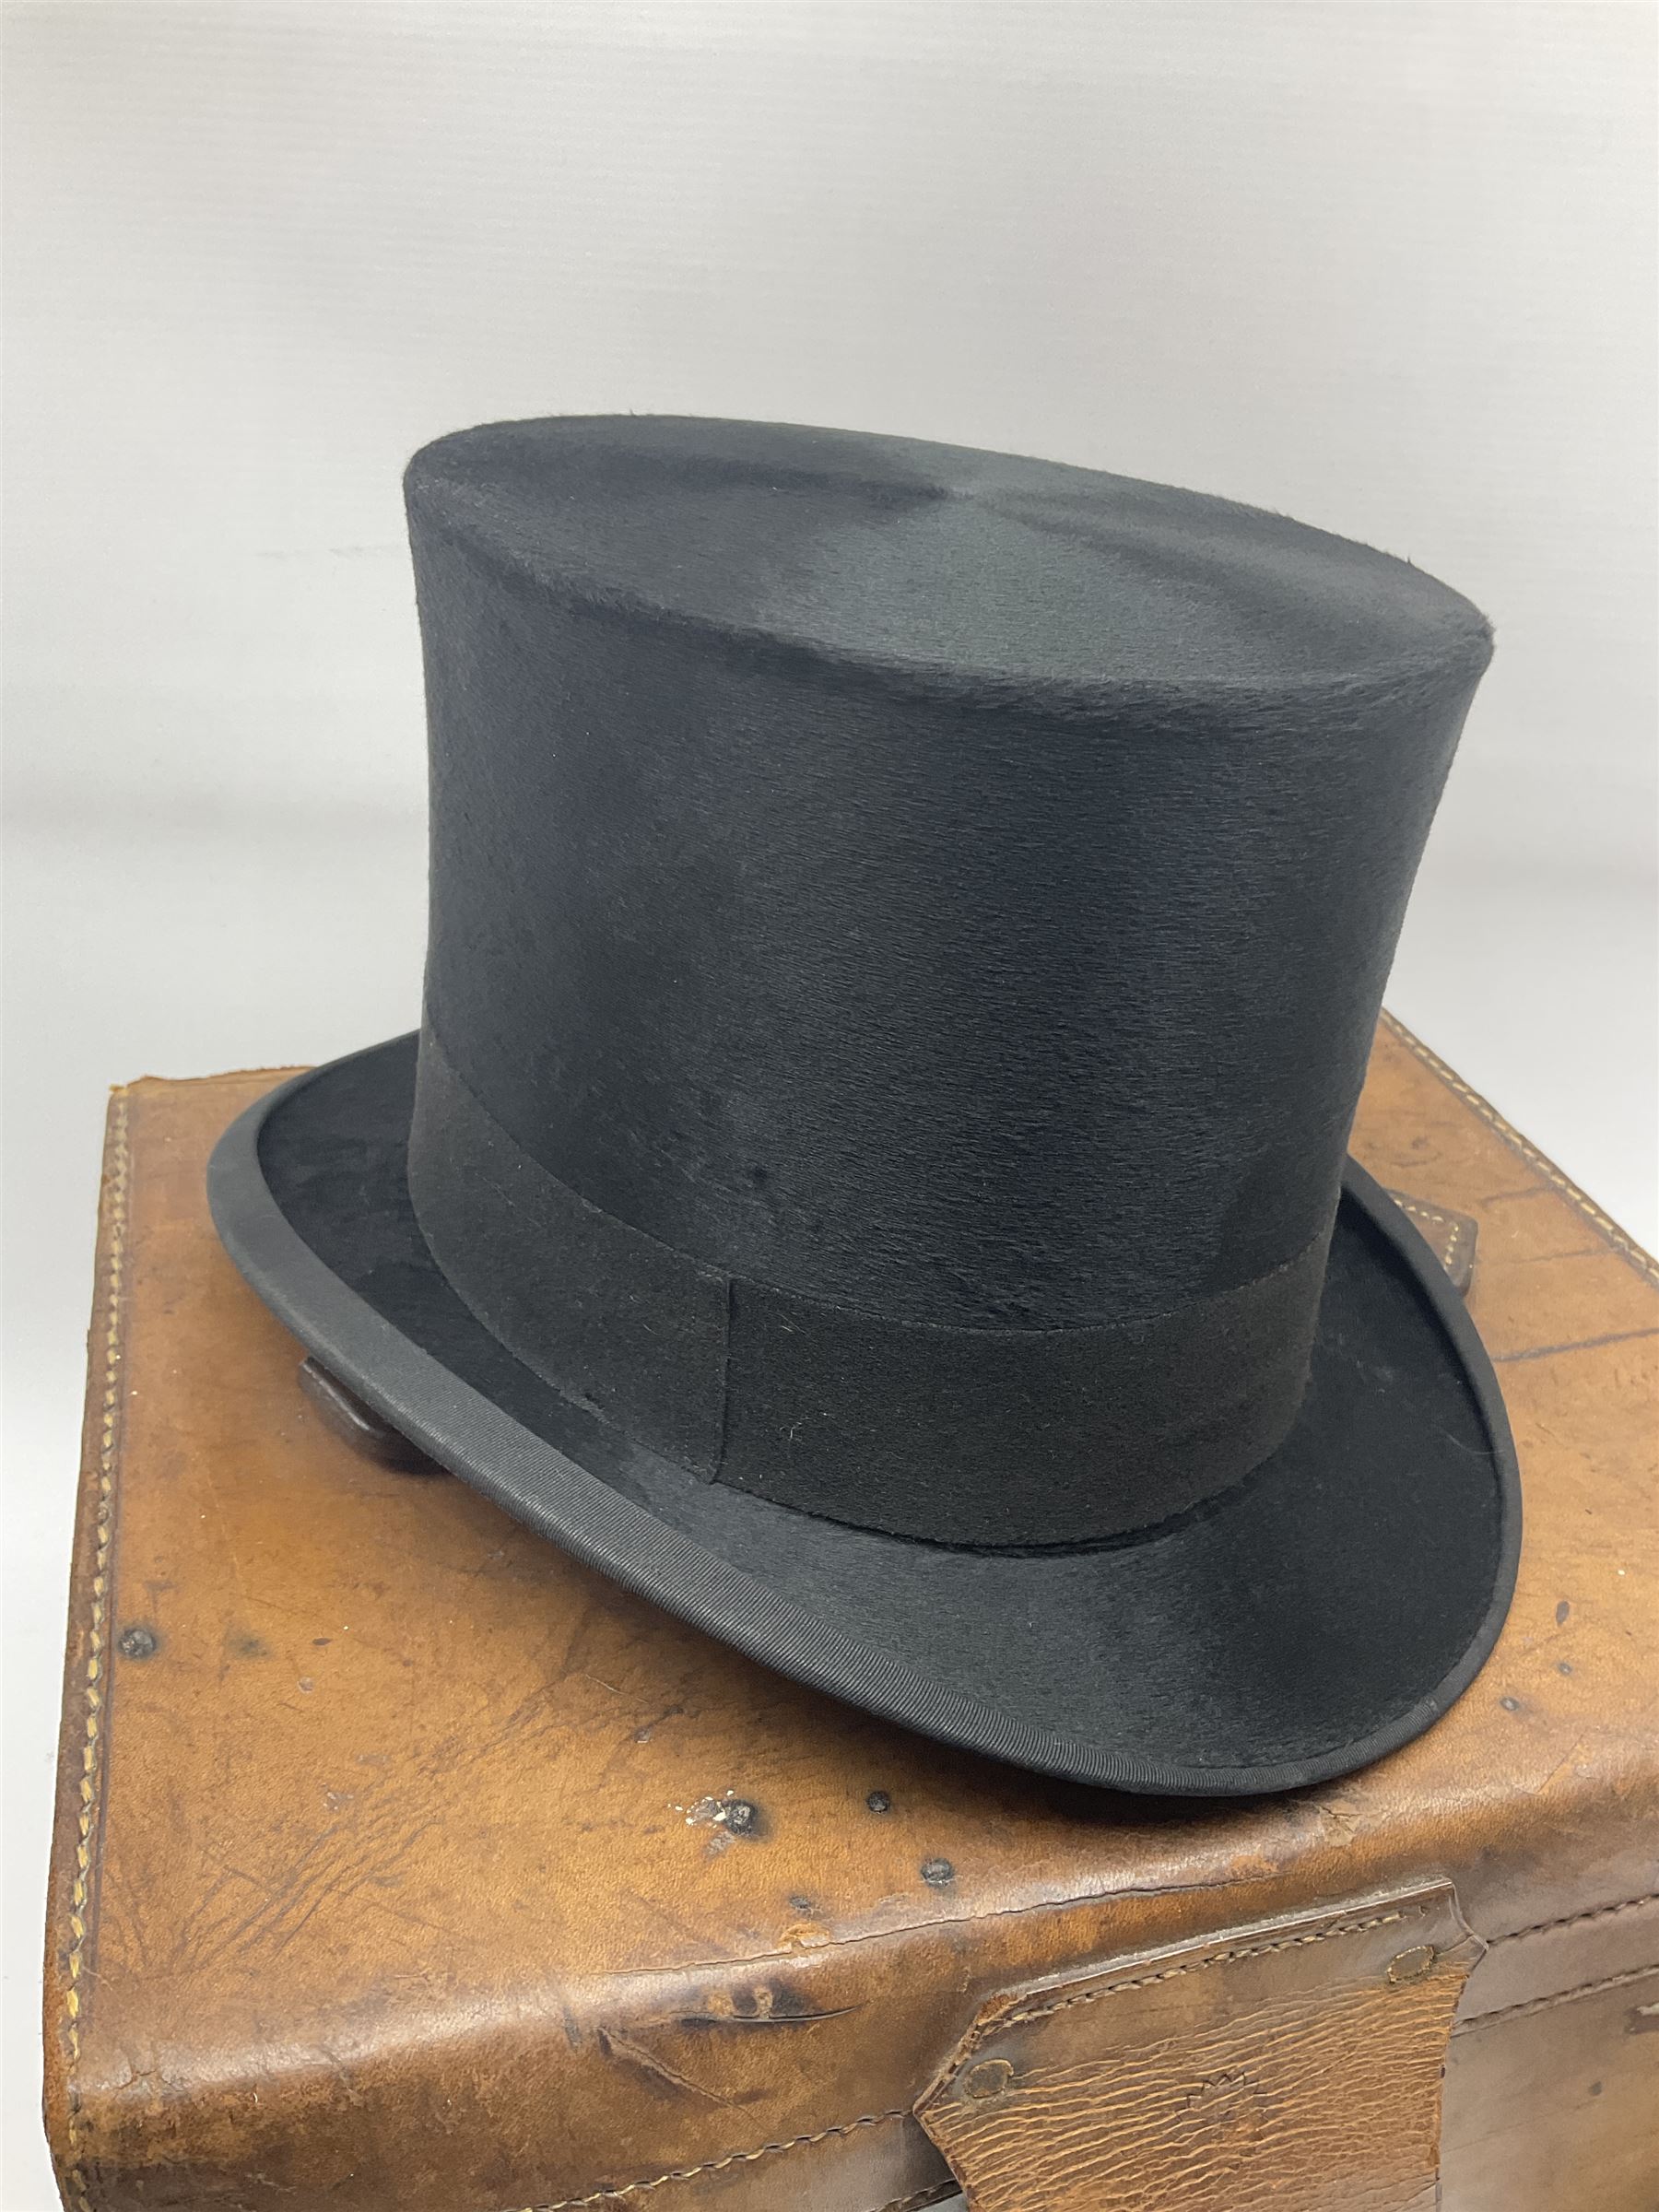 Gentlemen's black brushed silk top hat by Henry Heath of London housed in a leather case with dark r - Image 6 of 9